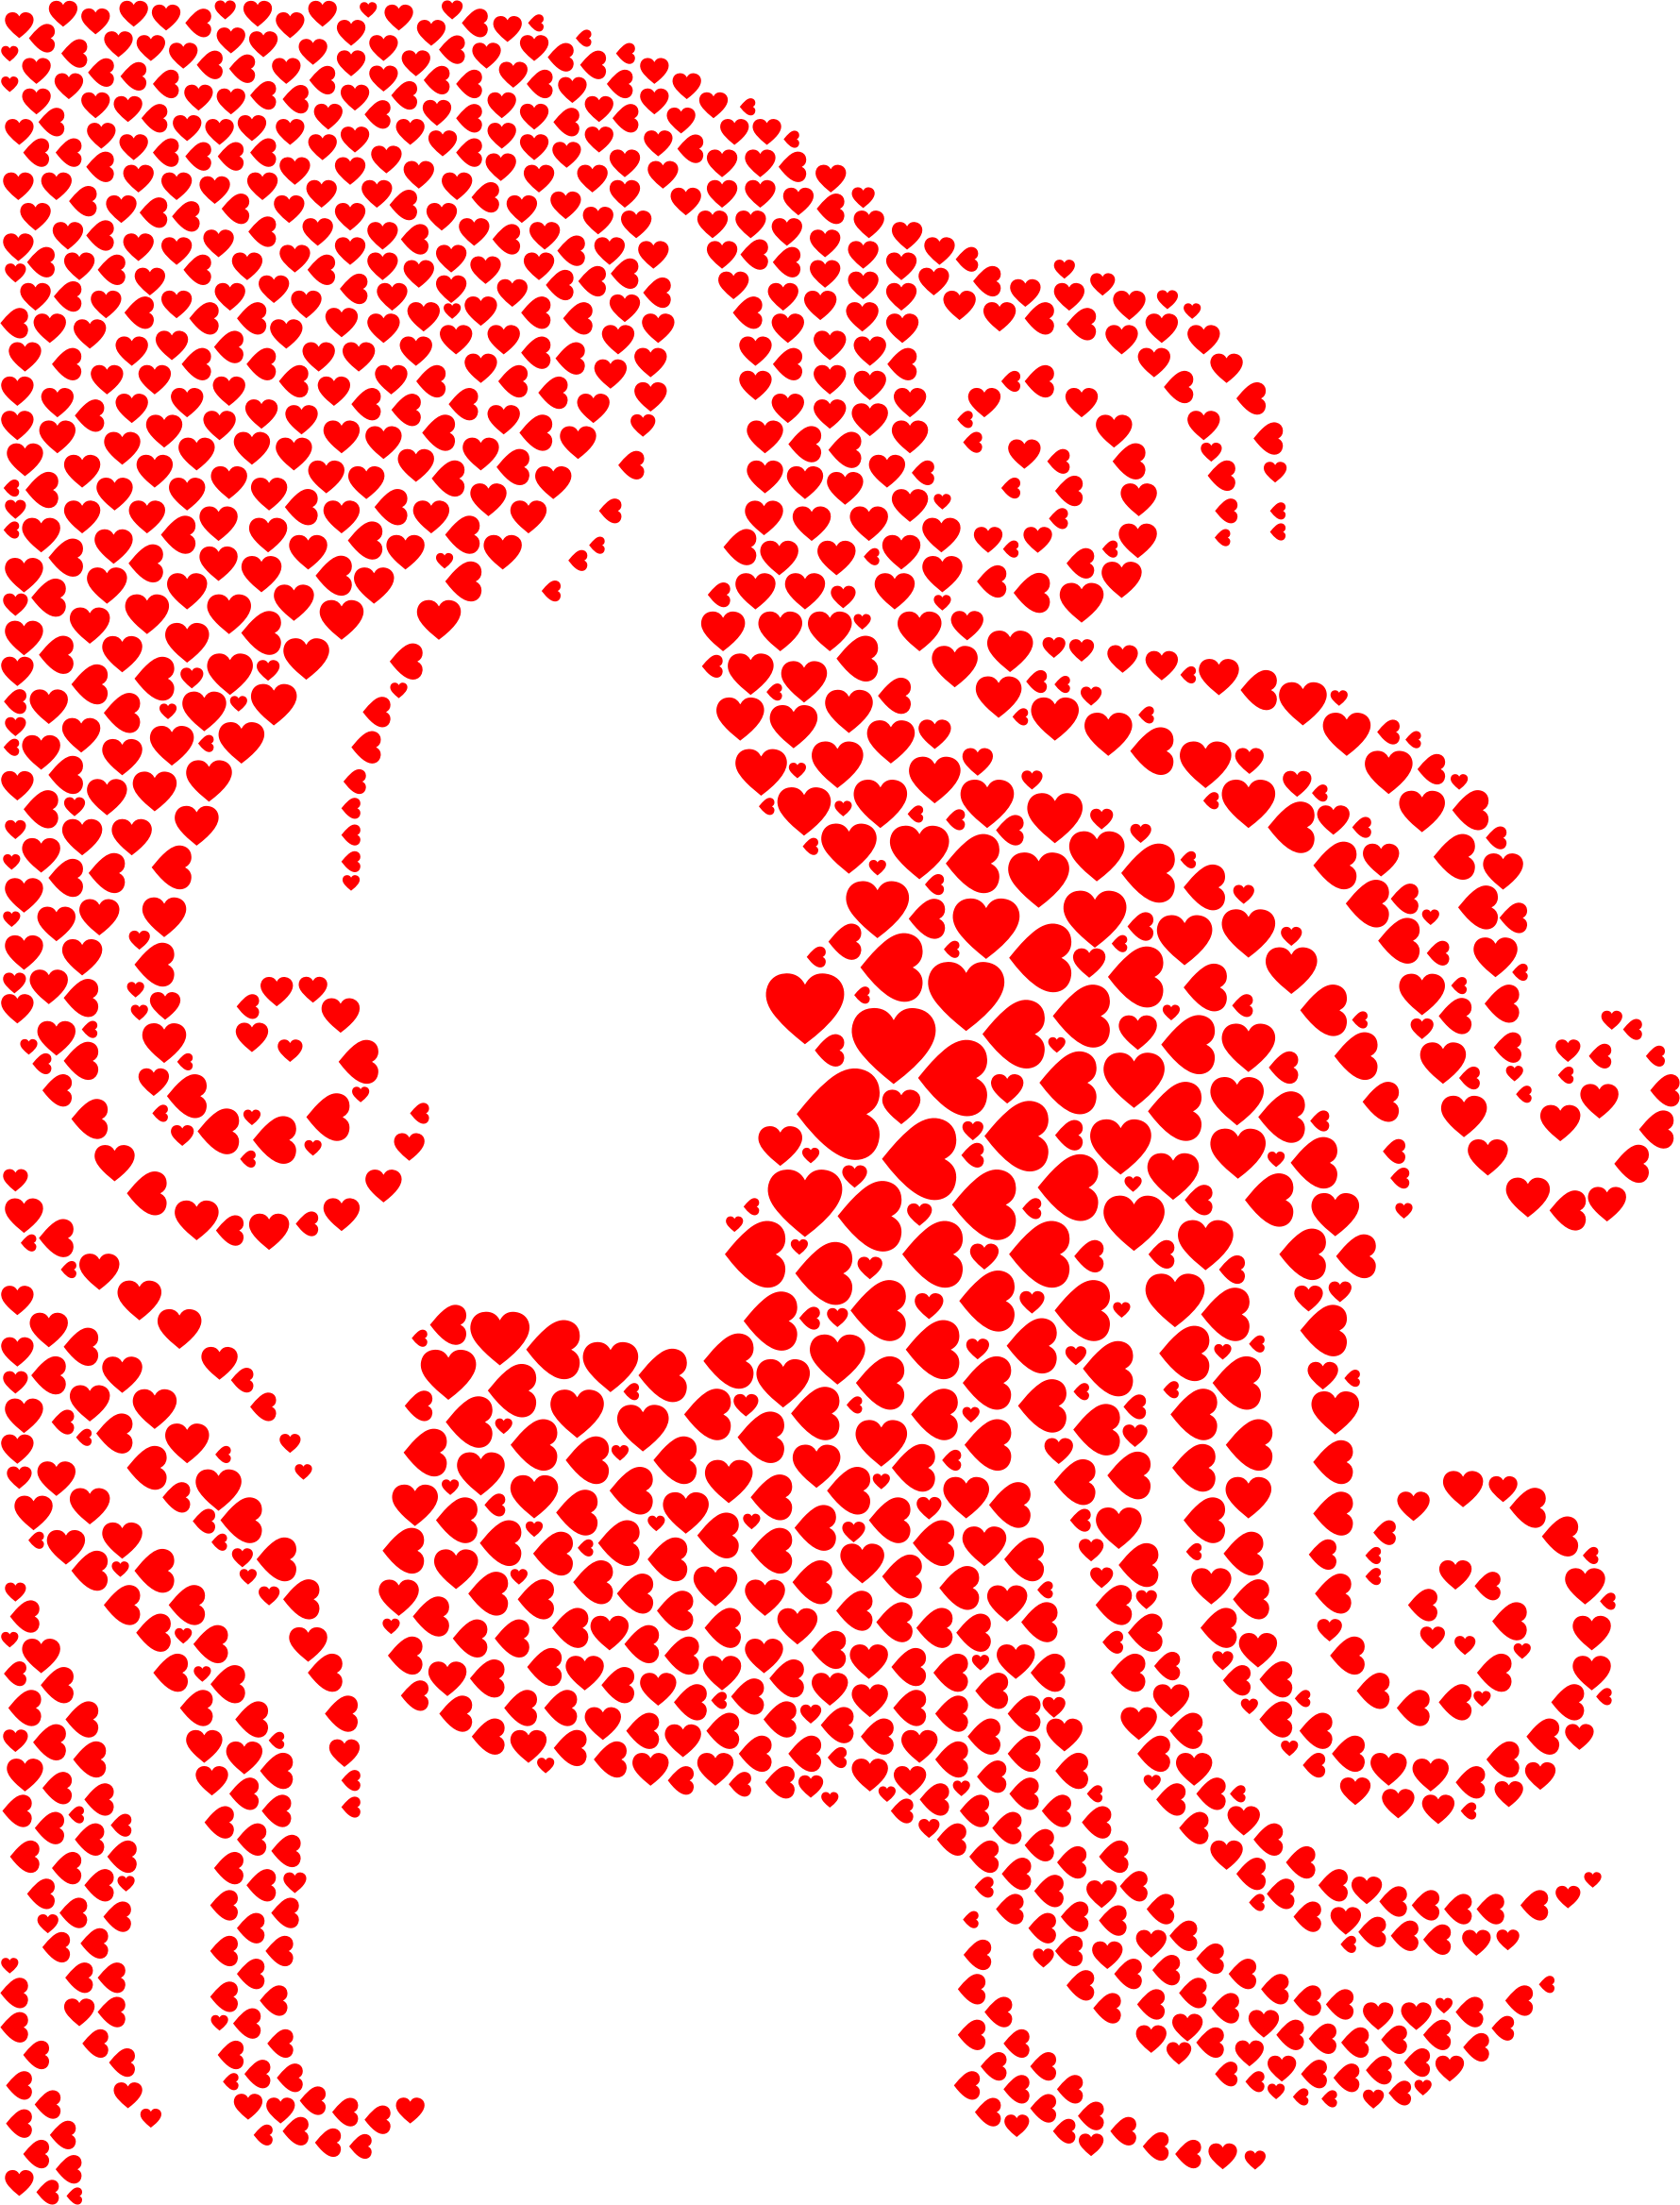 Female-Hair-Profile-Silhouette-Hearts-Red.png